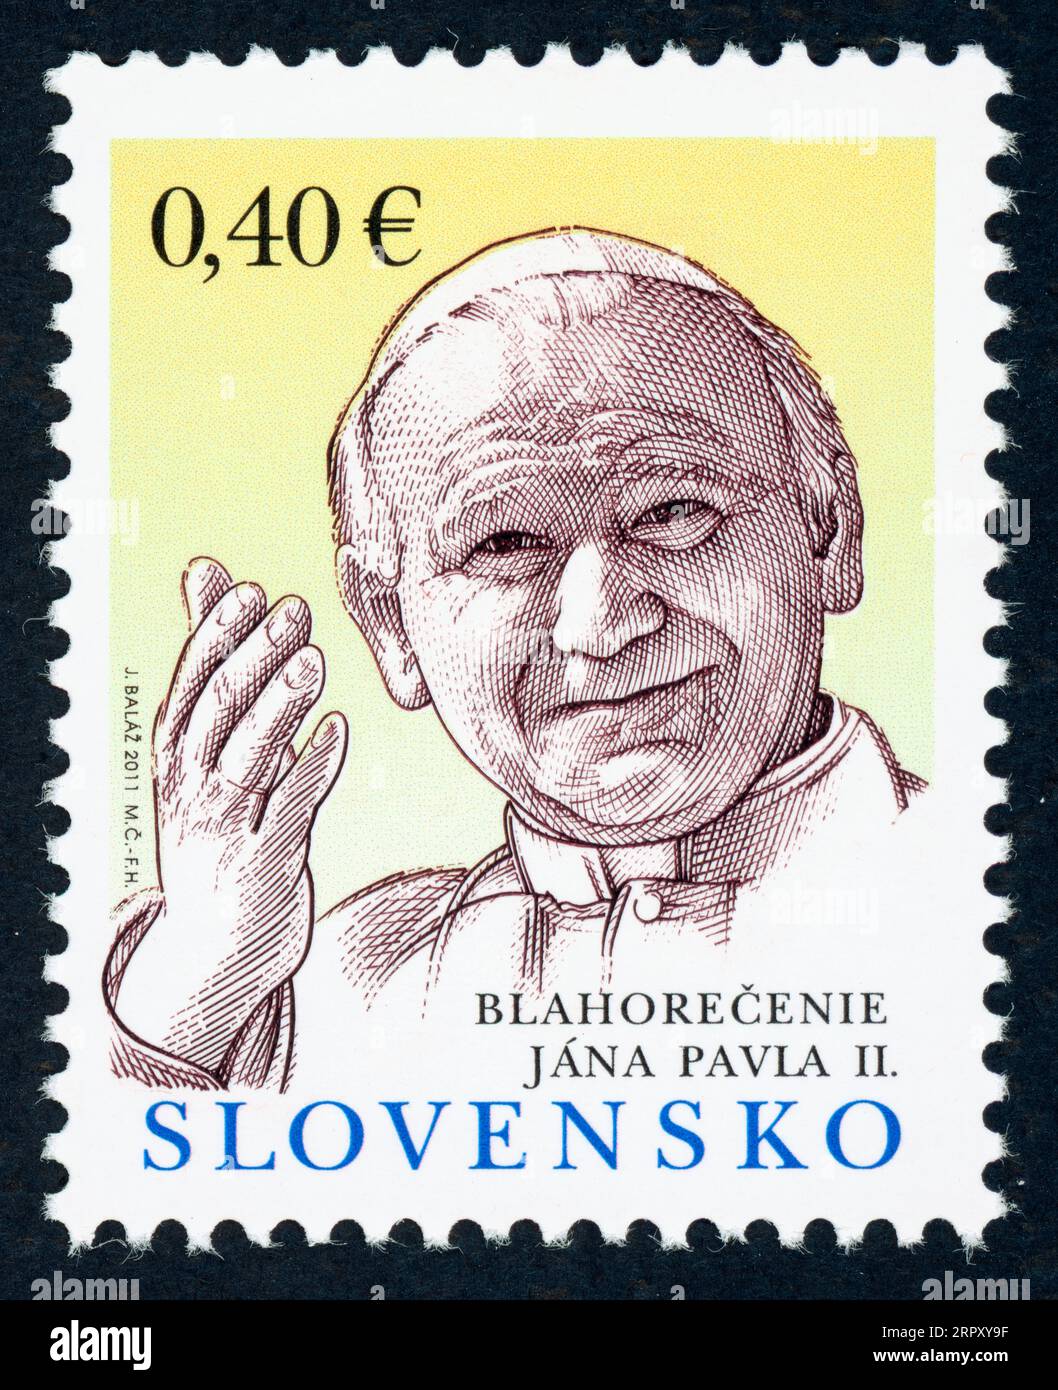 Beatification of John Paul II. Postage stamp issued in Slovakia in 2011 on the occasion of the beatification of John Paul II in Rome, Italy. Stock Photo